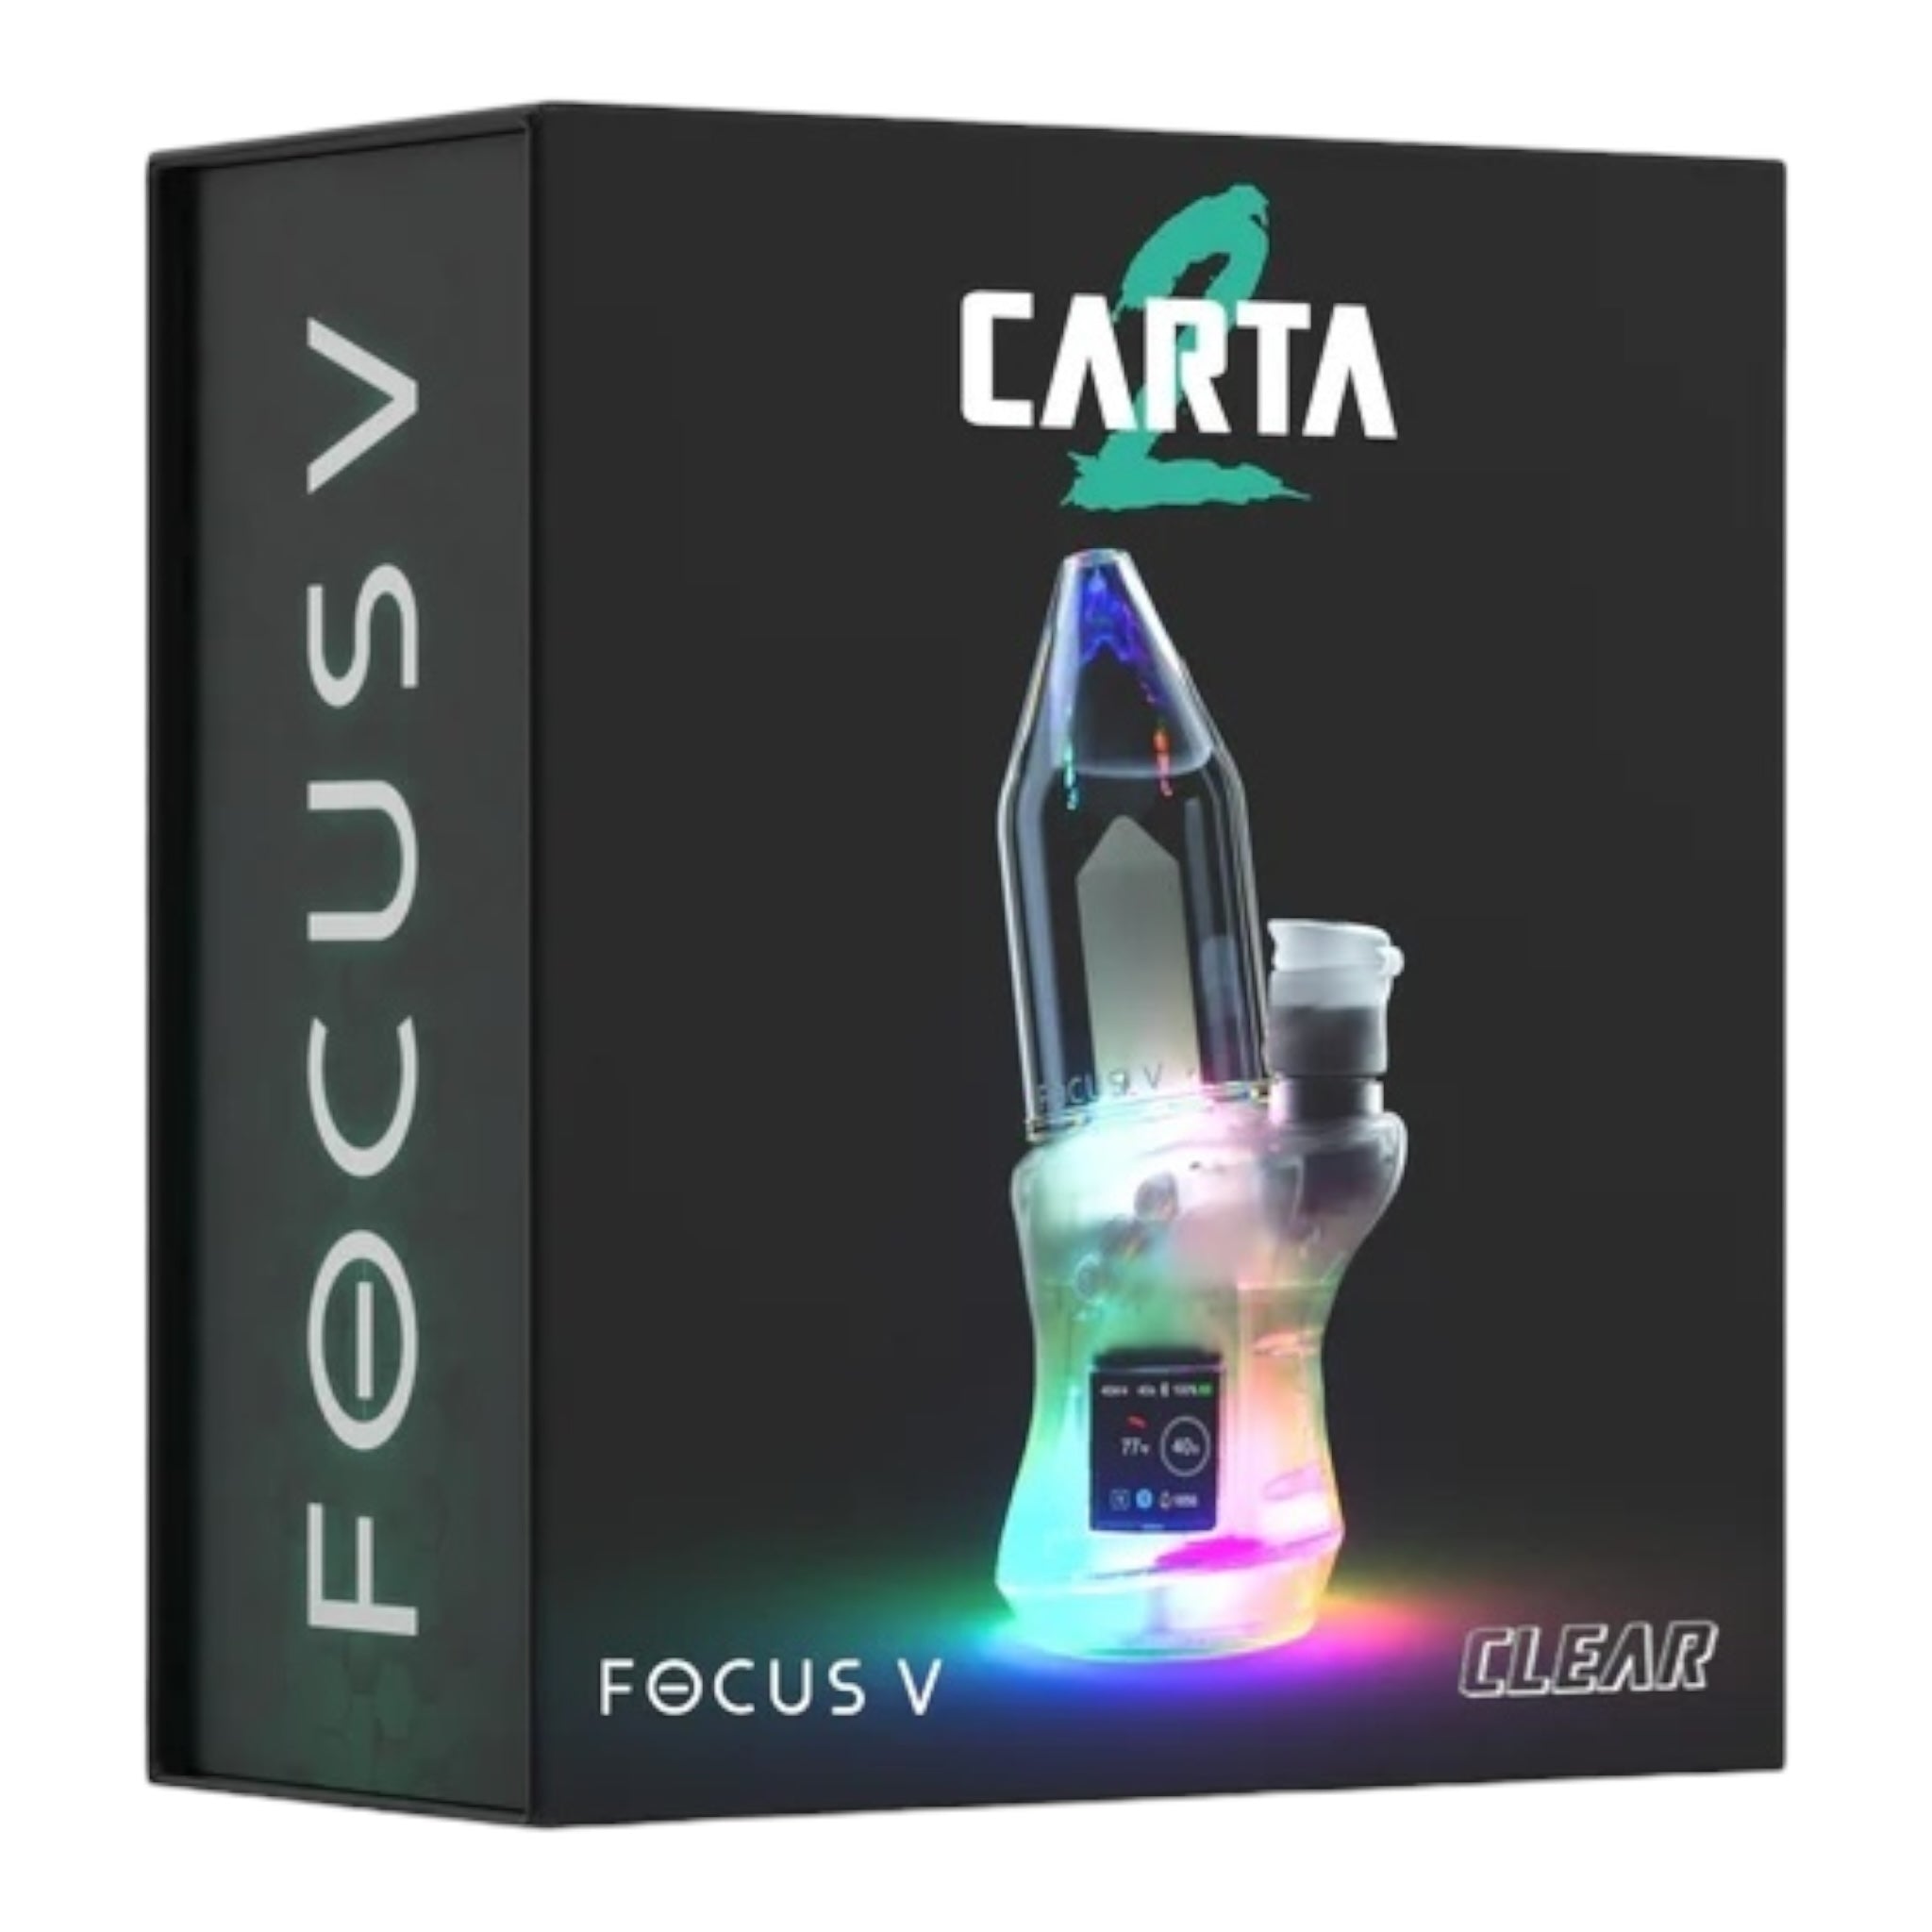 Clear Focus V - CARTA 2 - Portable Dry Herb & Wax Oil Vaporizer for sale